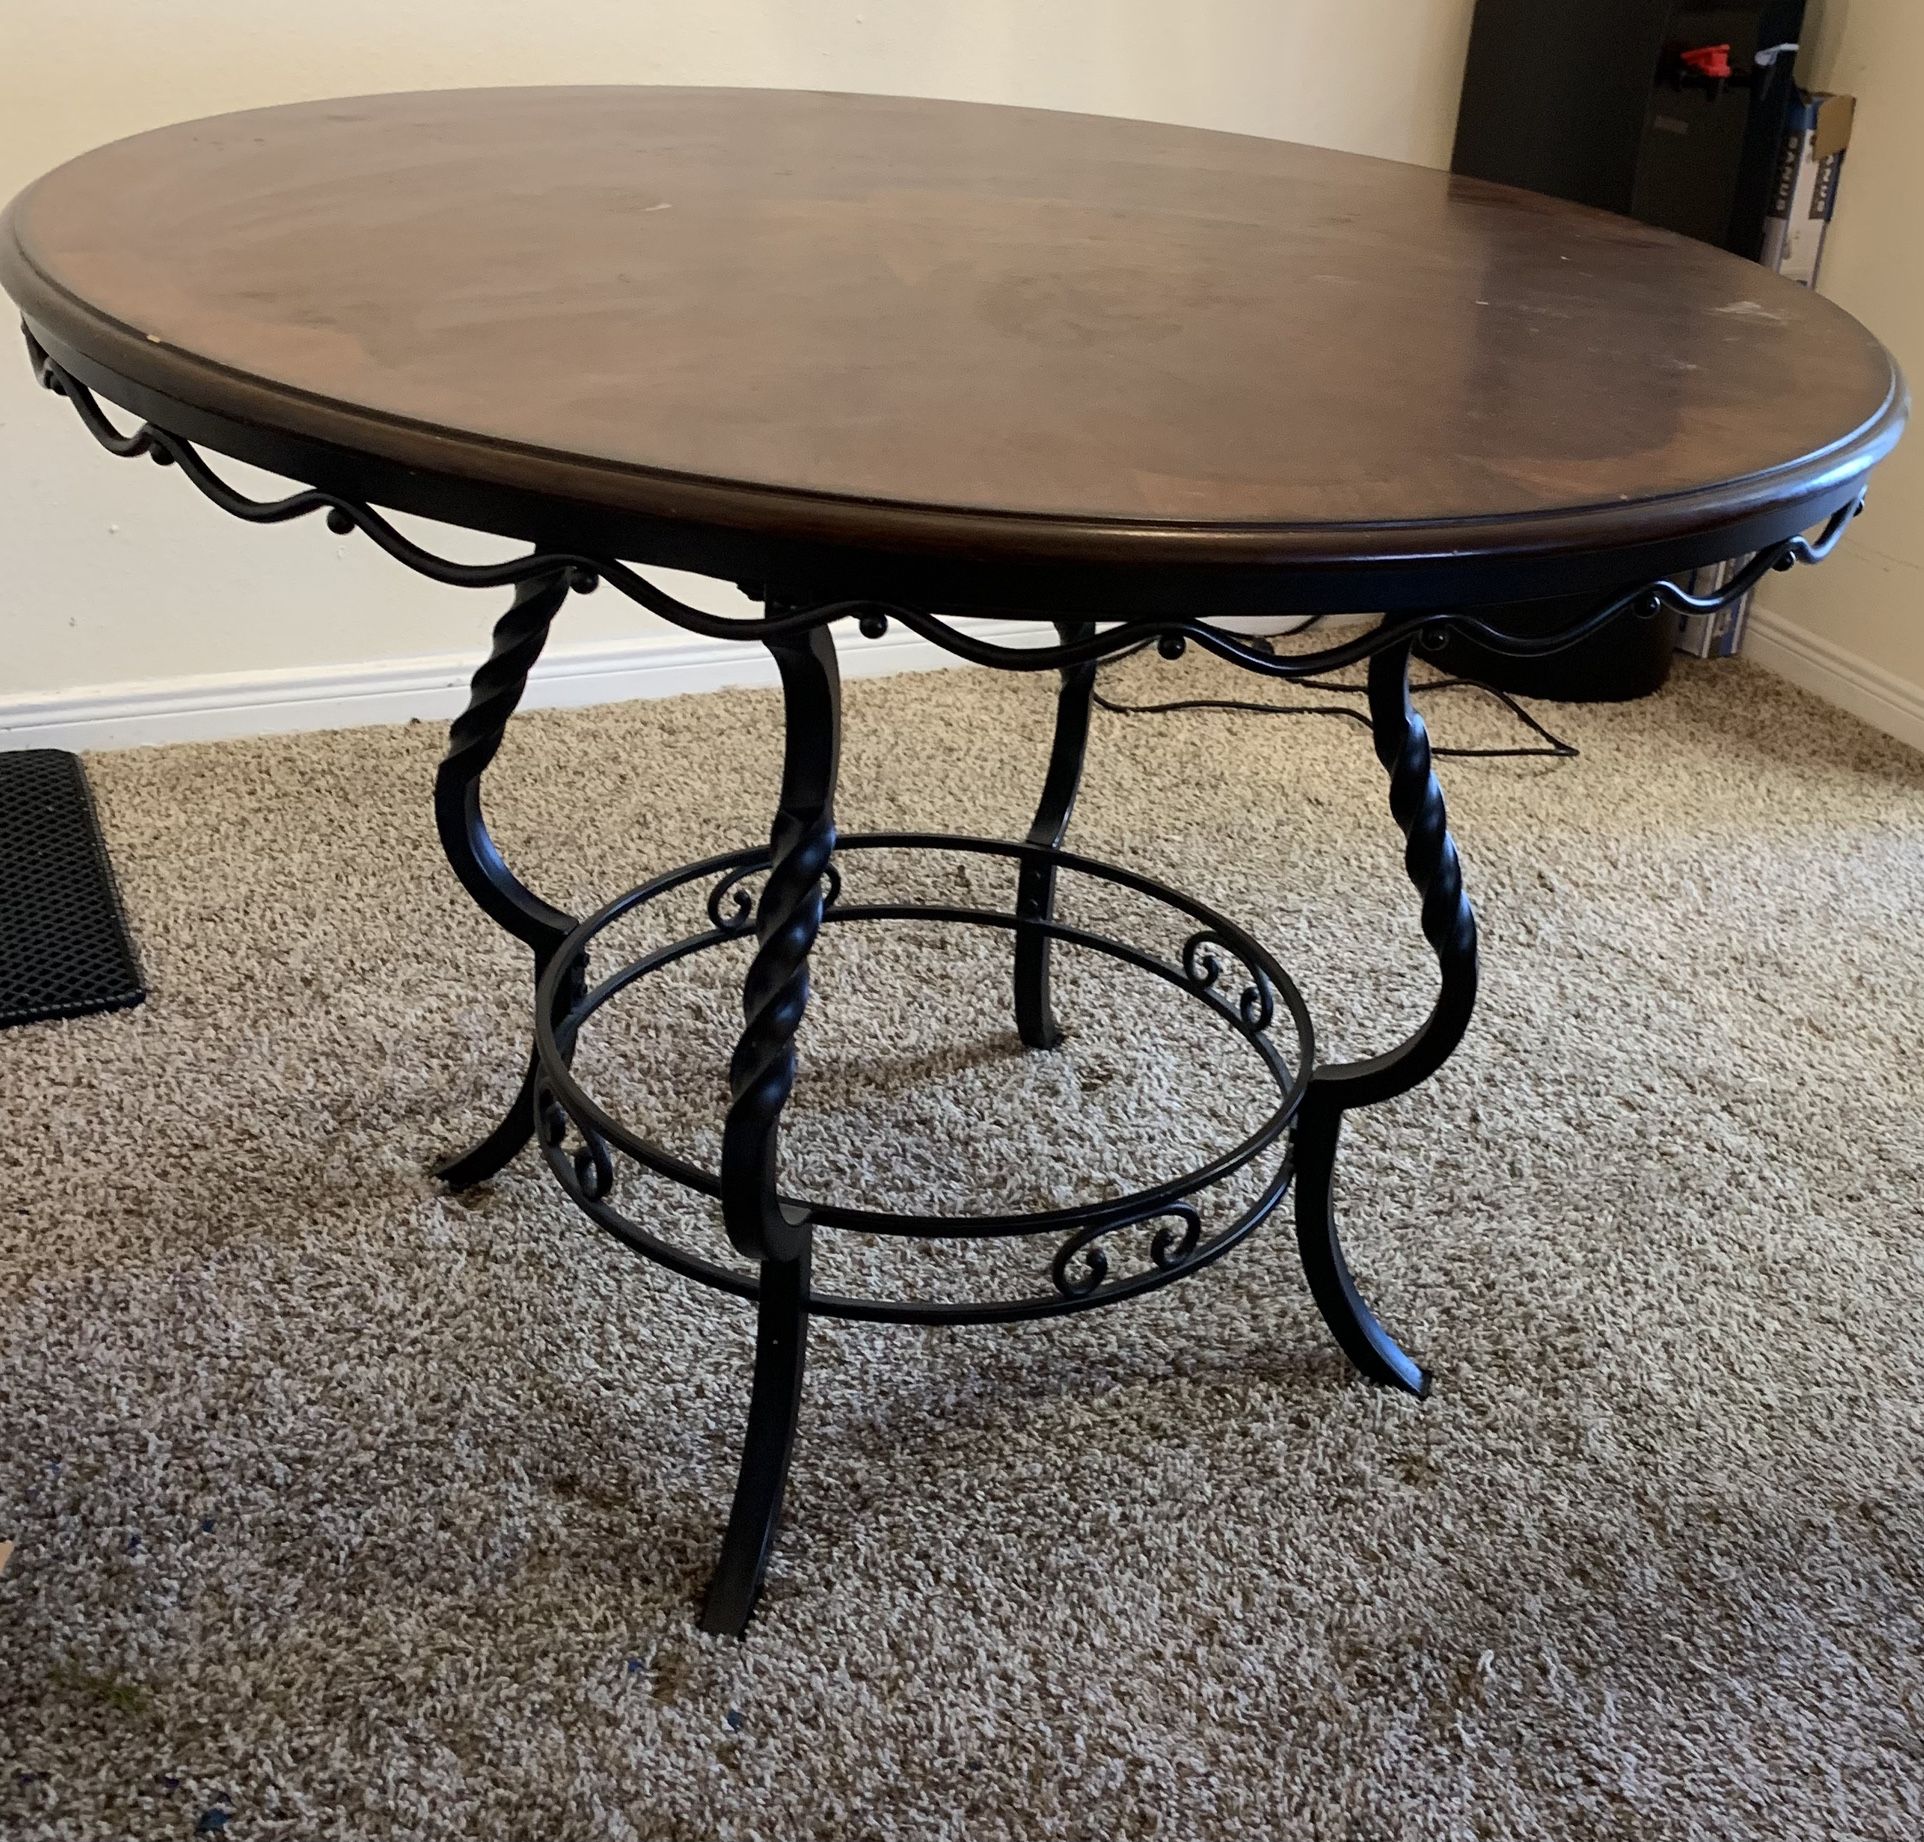 MOVING SALE : Dining Table (no chairs) FOR SALE $50